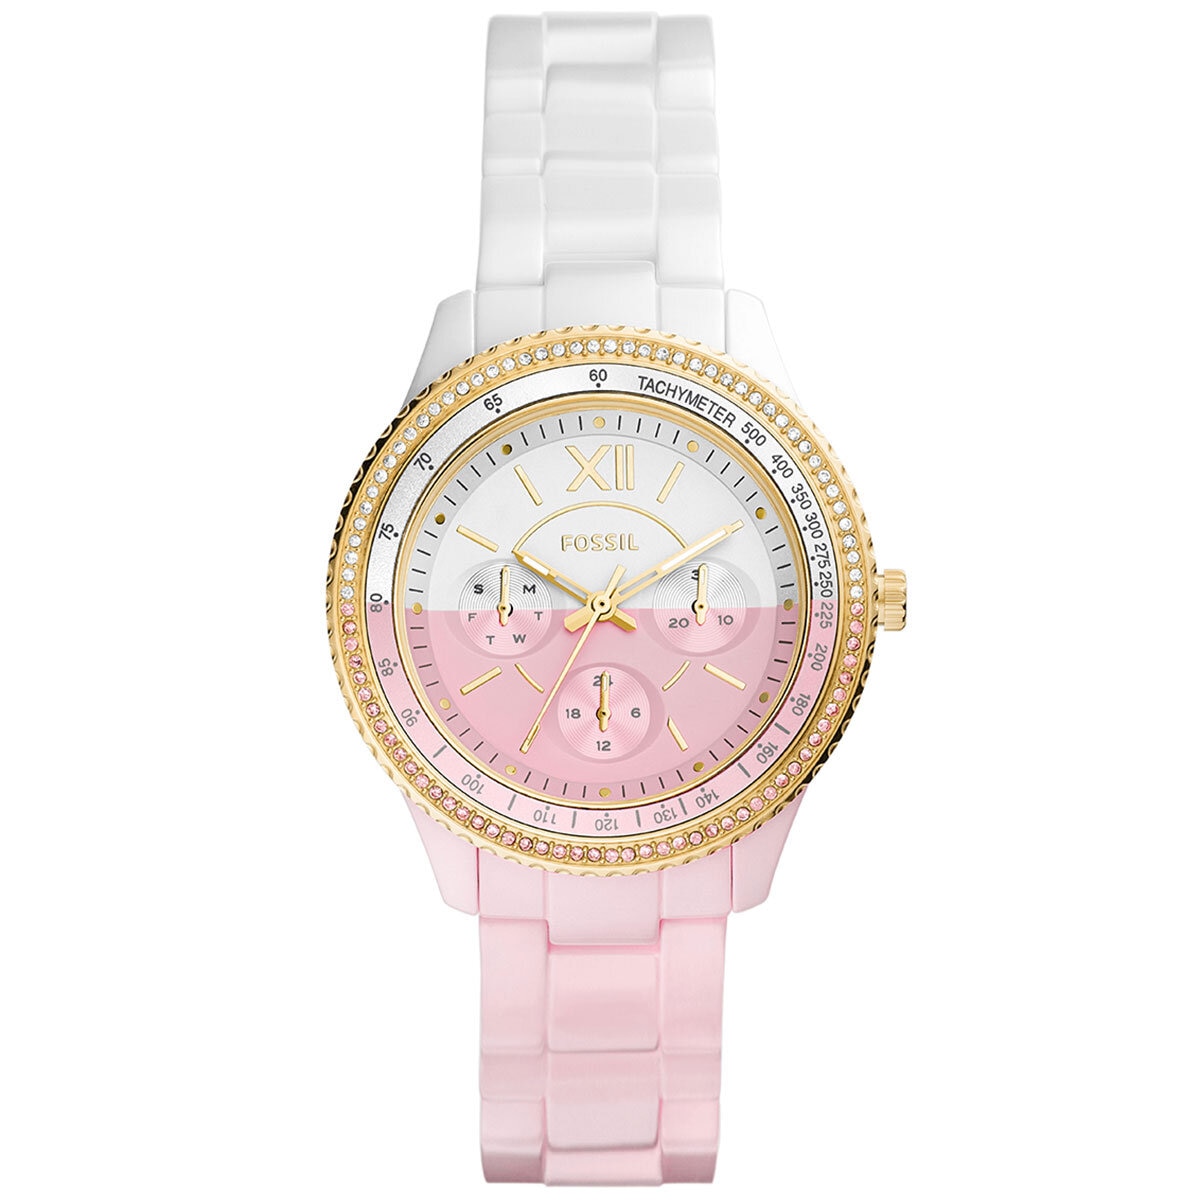 Fossil Stella Multifunction Pink and White Ceramic Watch CE1119l